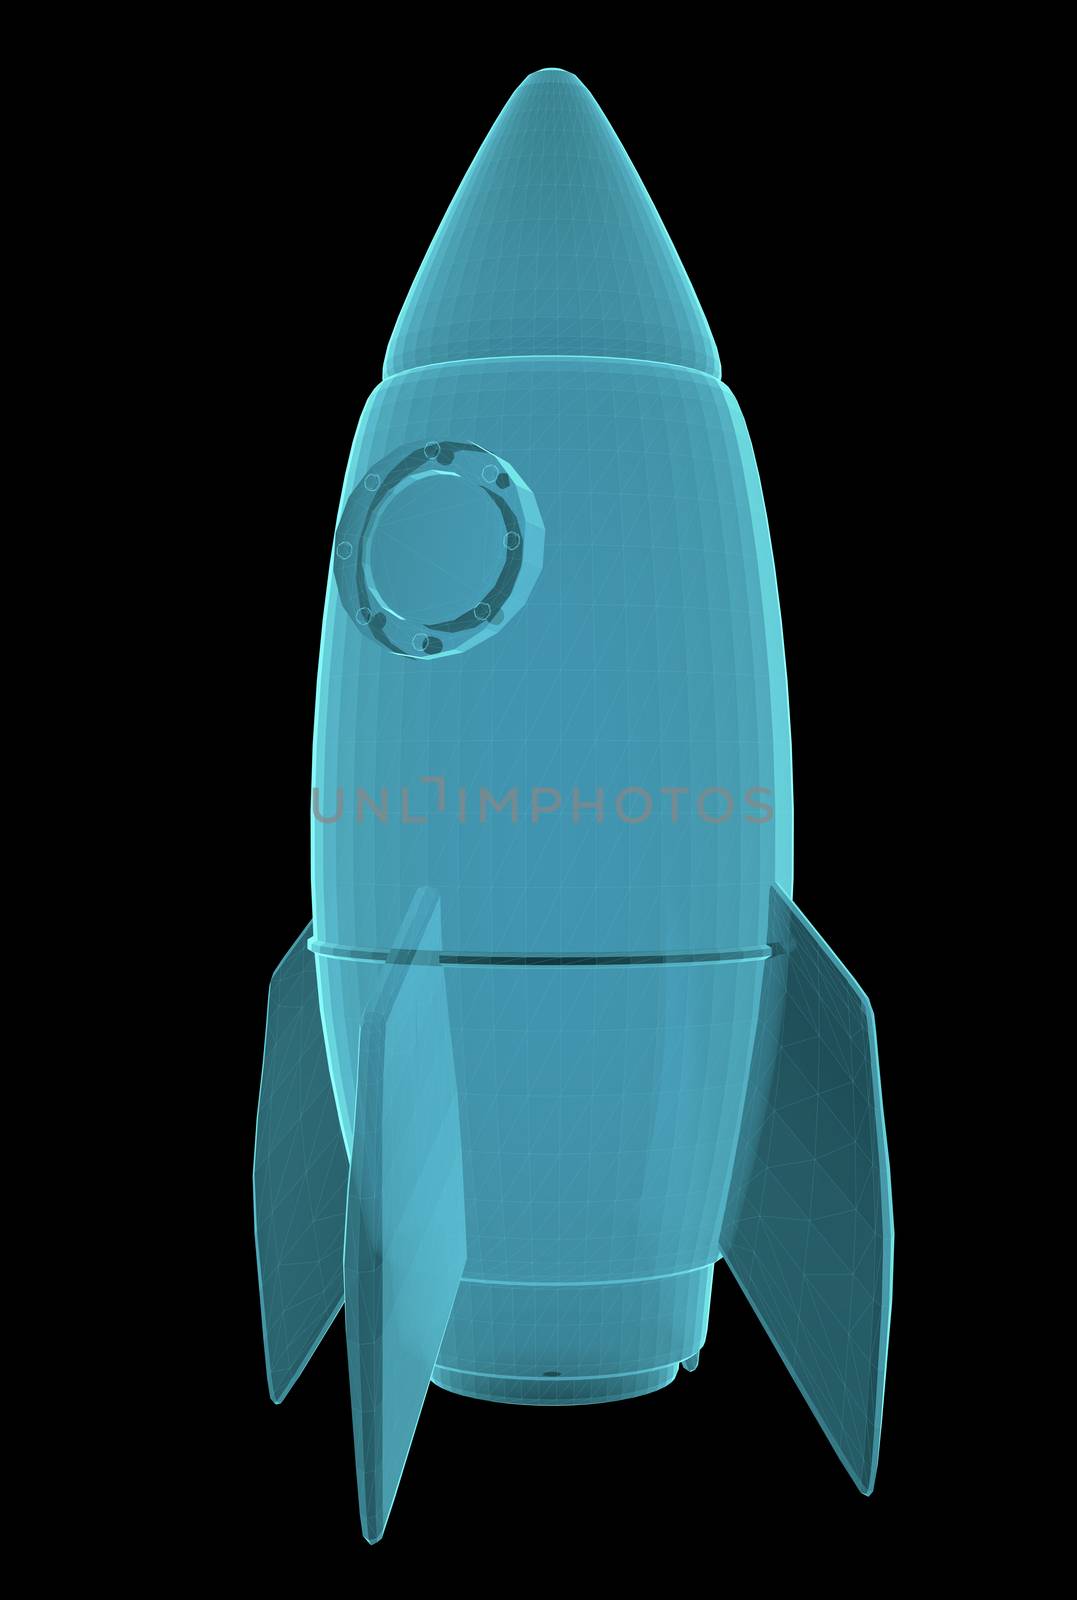 X-Ray Image Of Rocket Space Ship by cherezoff